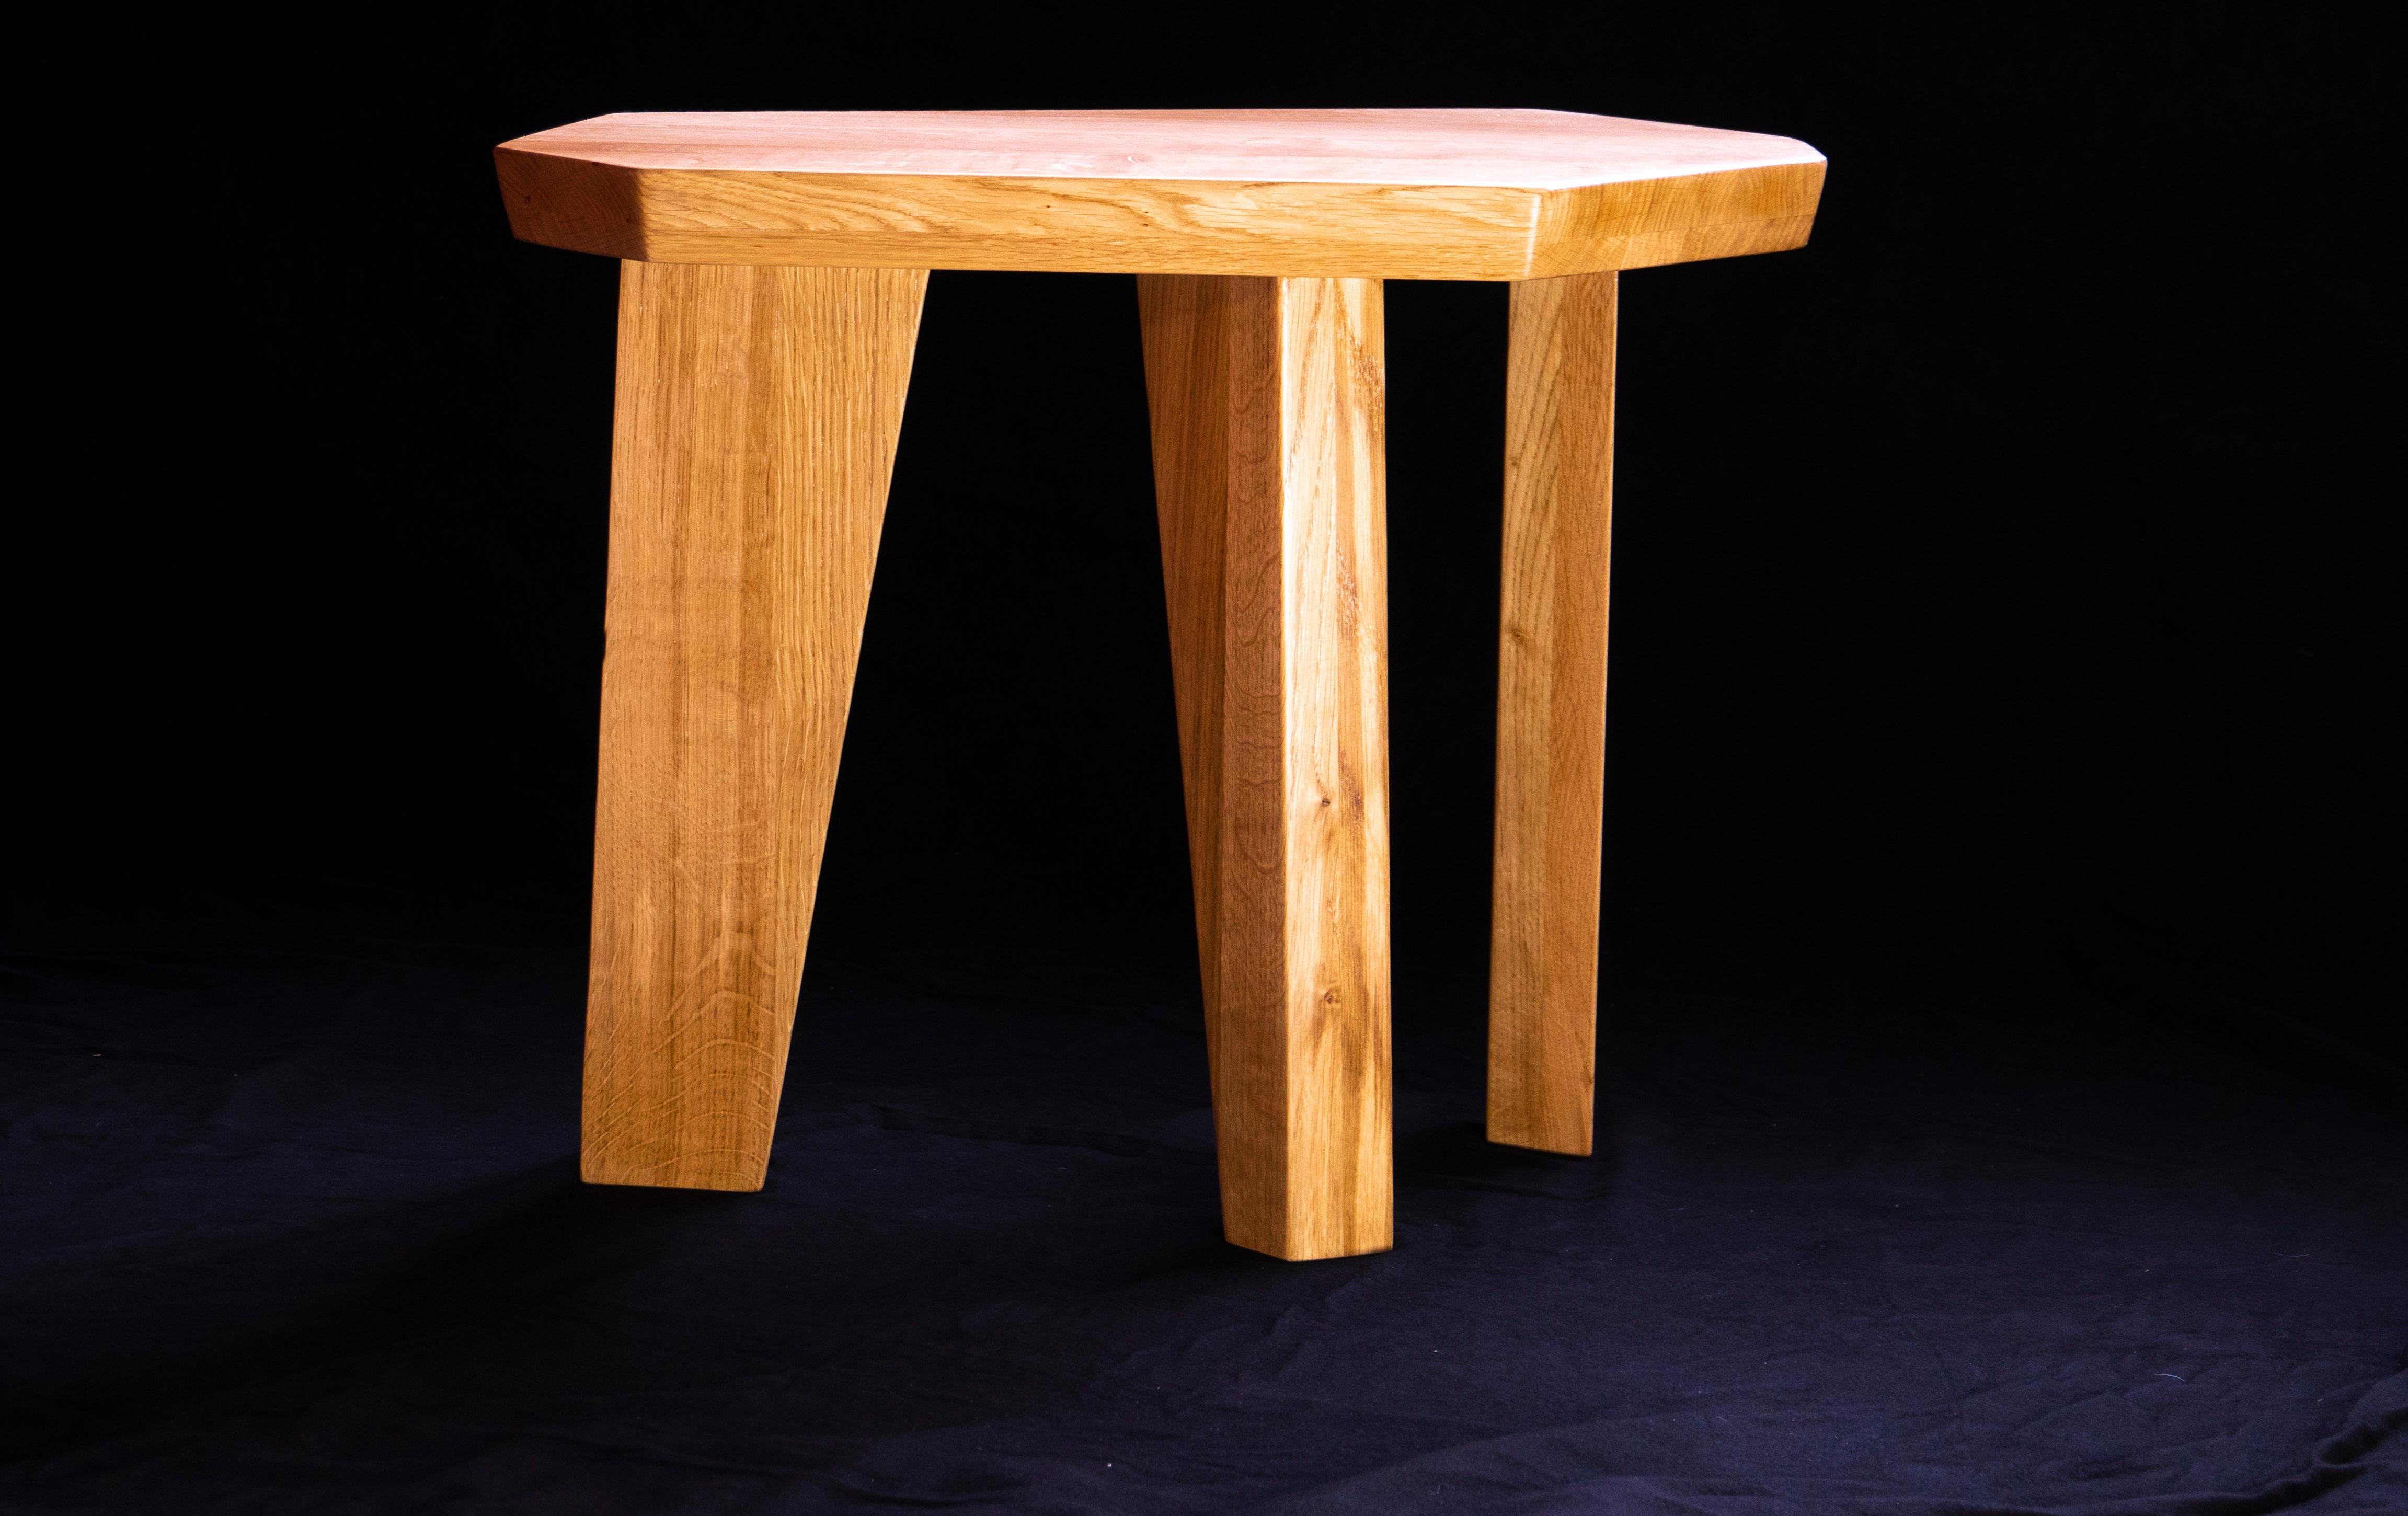 Sculptural pair of side tables seemingly brought to life by the hands of sculptor Jacques Jarrige. 3 asymmetrical legs support a jagged edged top that is itself angled.